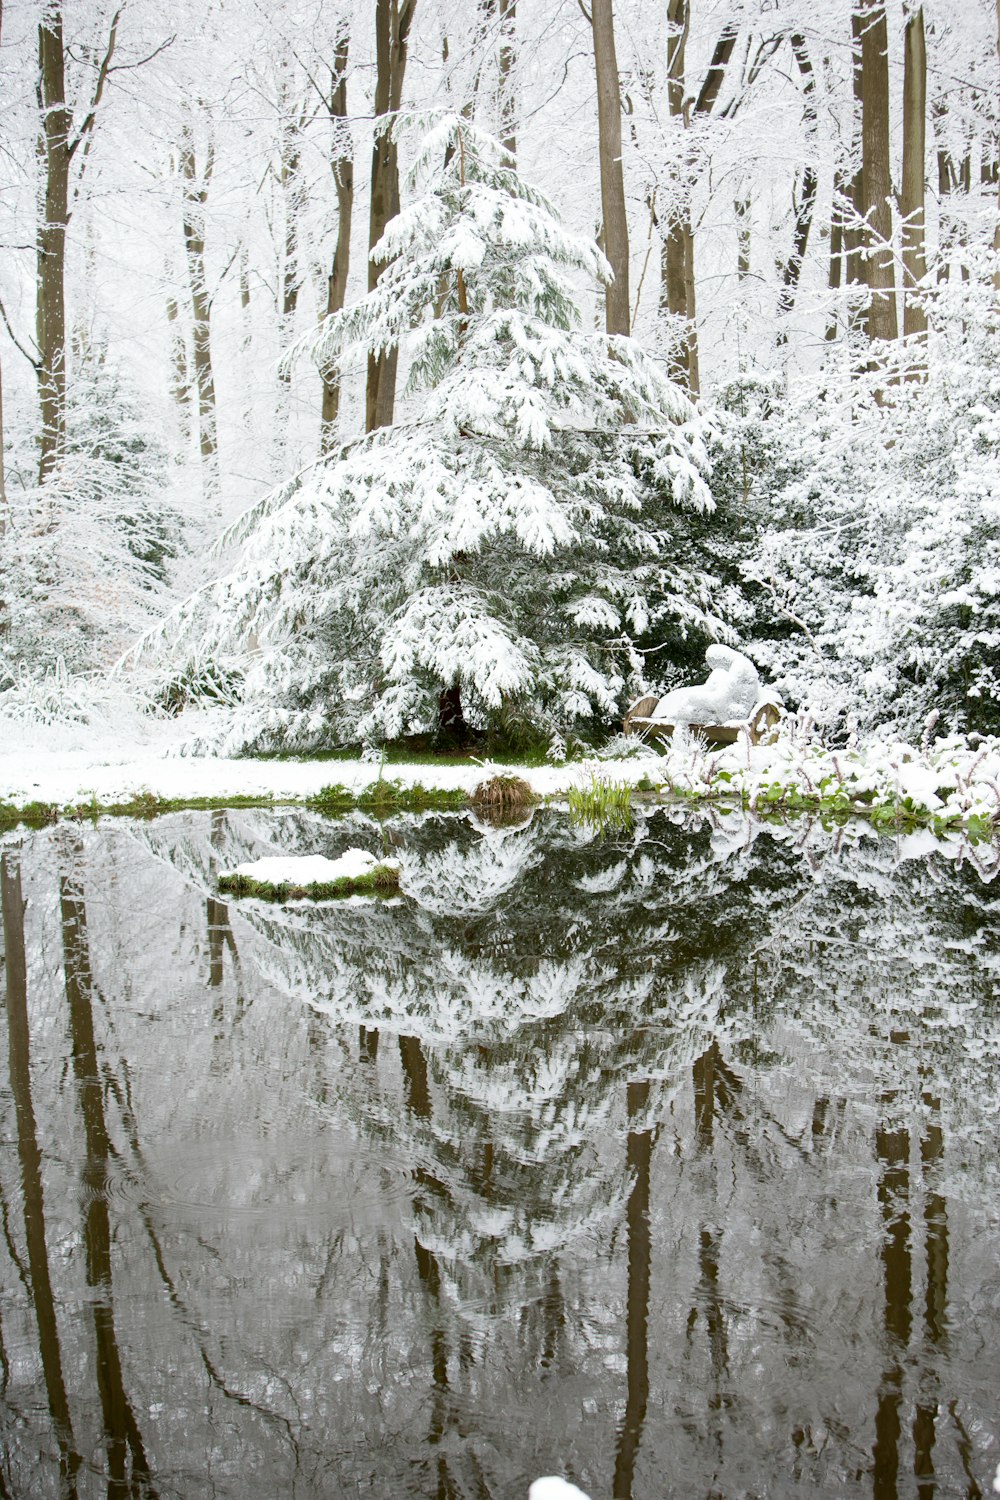 trees with snow near body of water